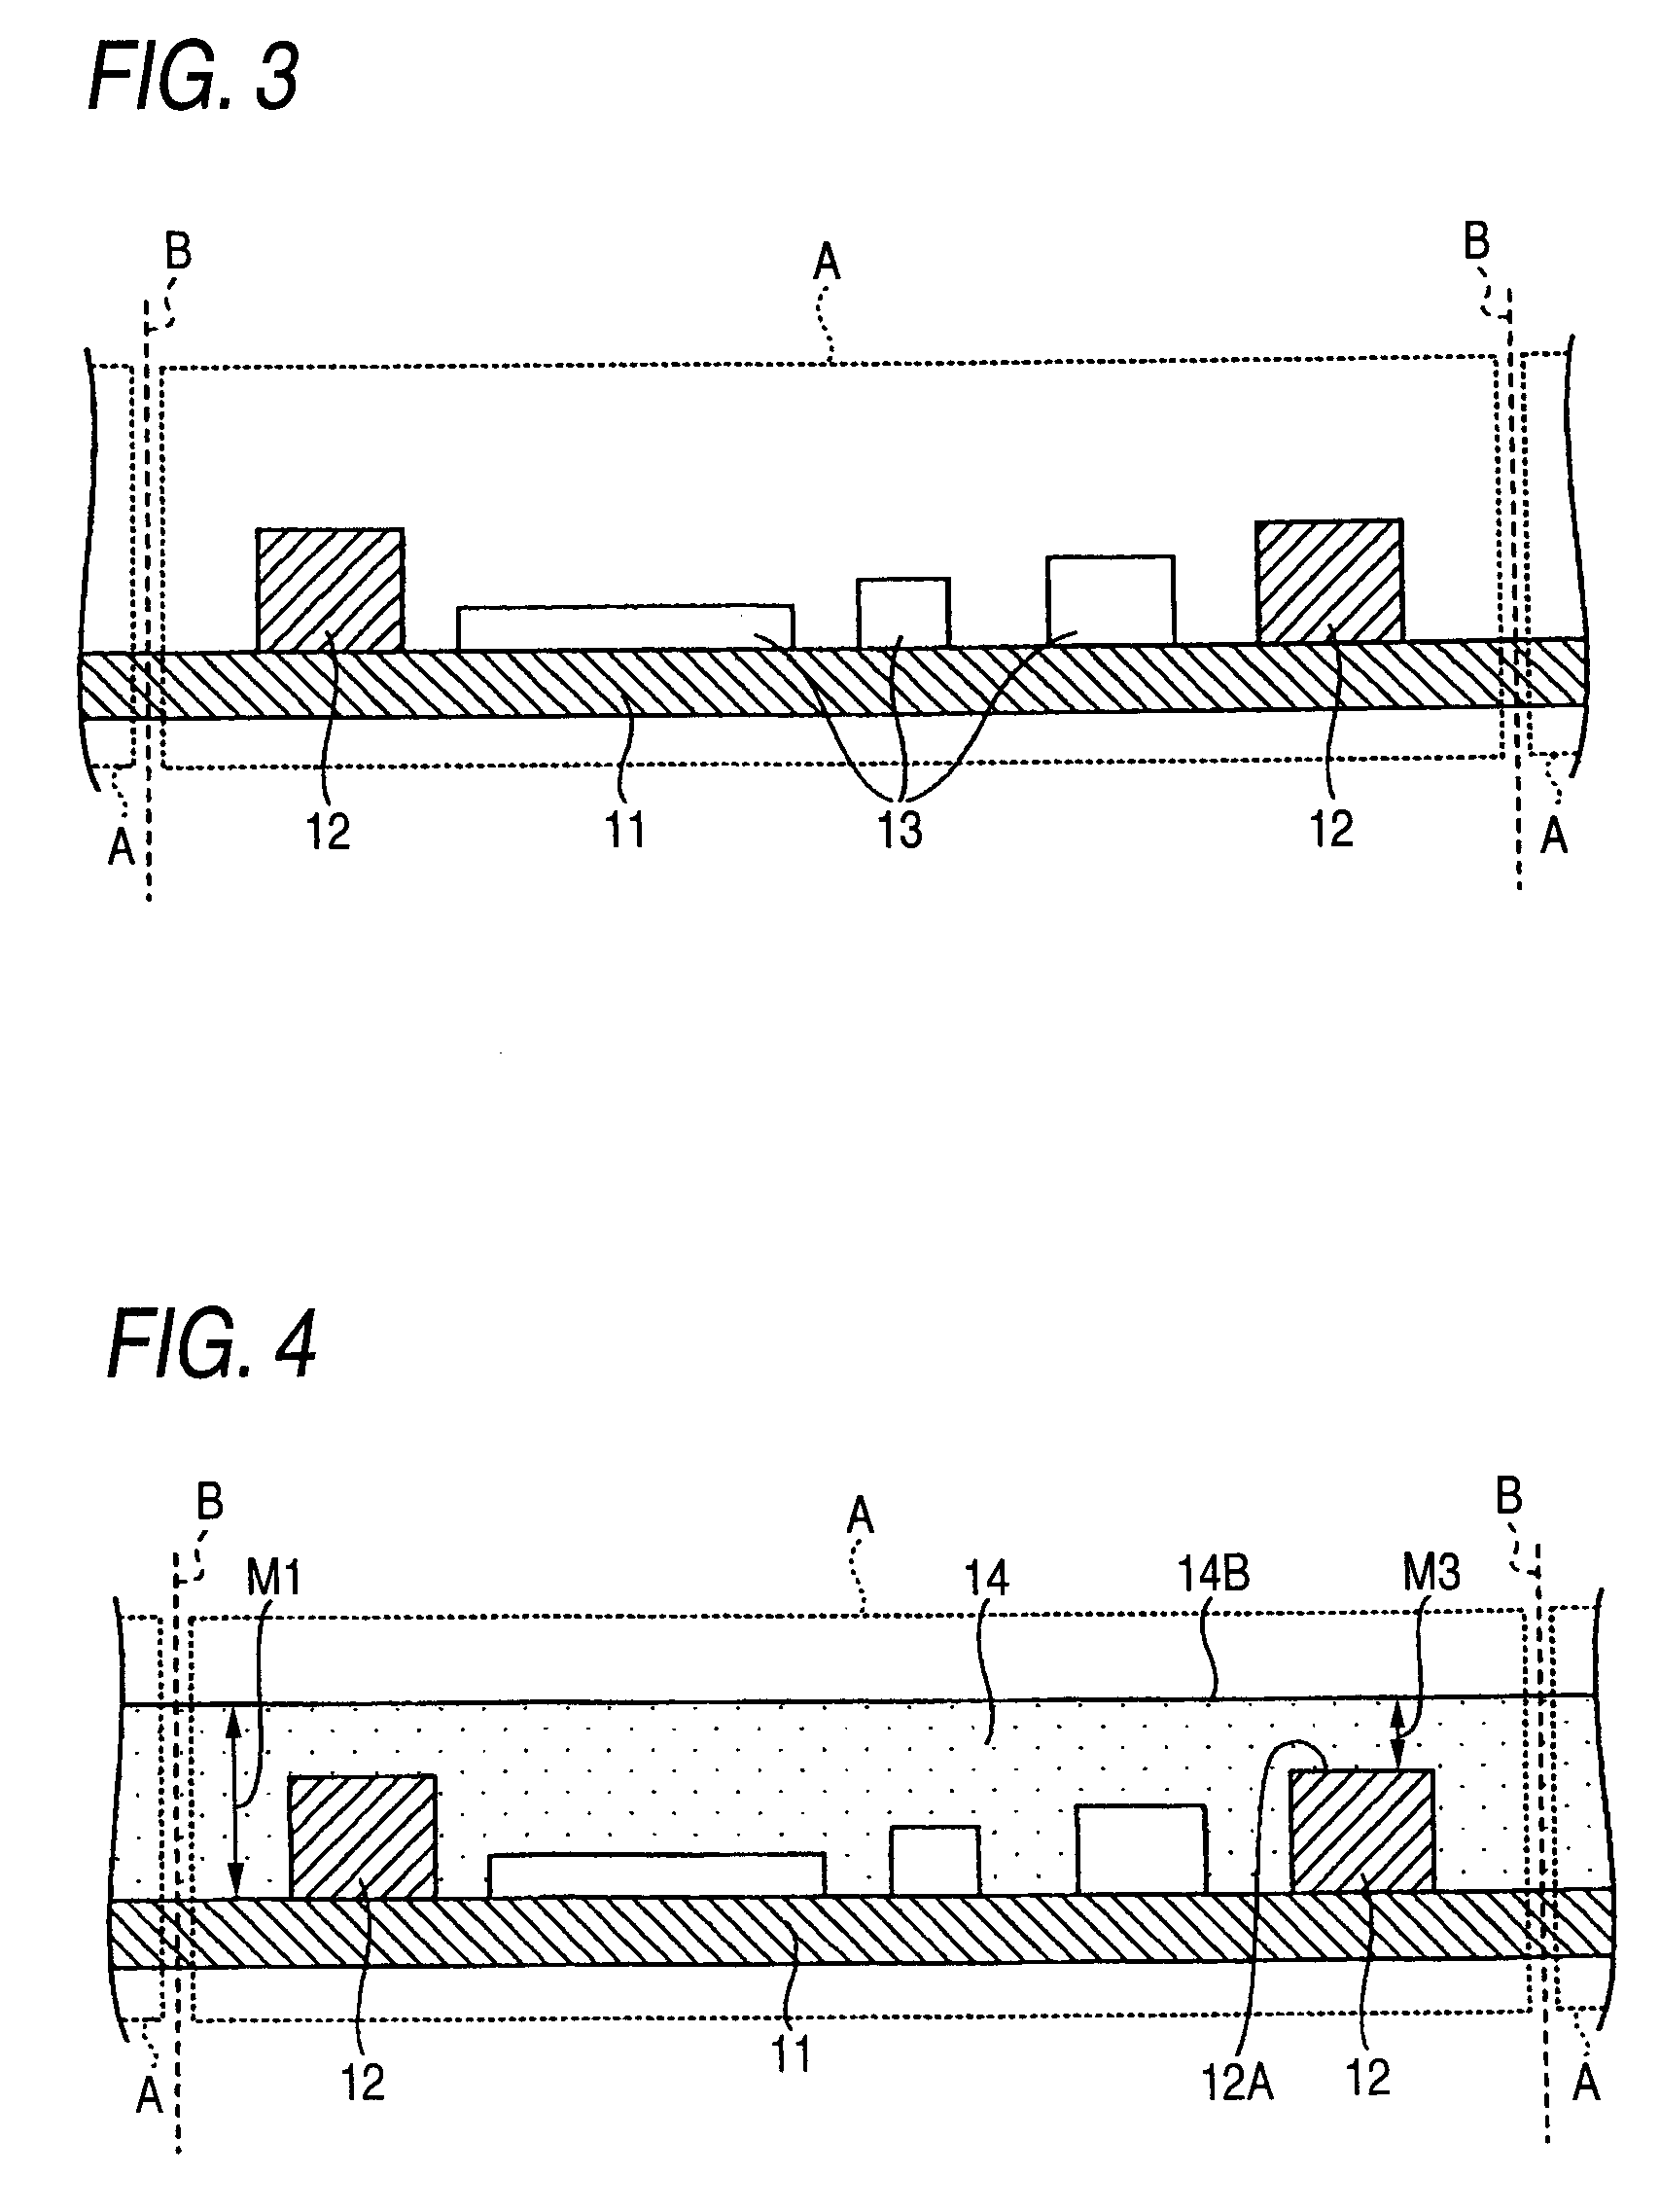 Method of manufacturing a semiconductor apparatus